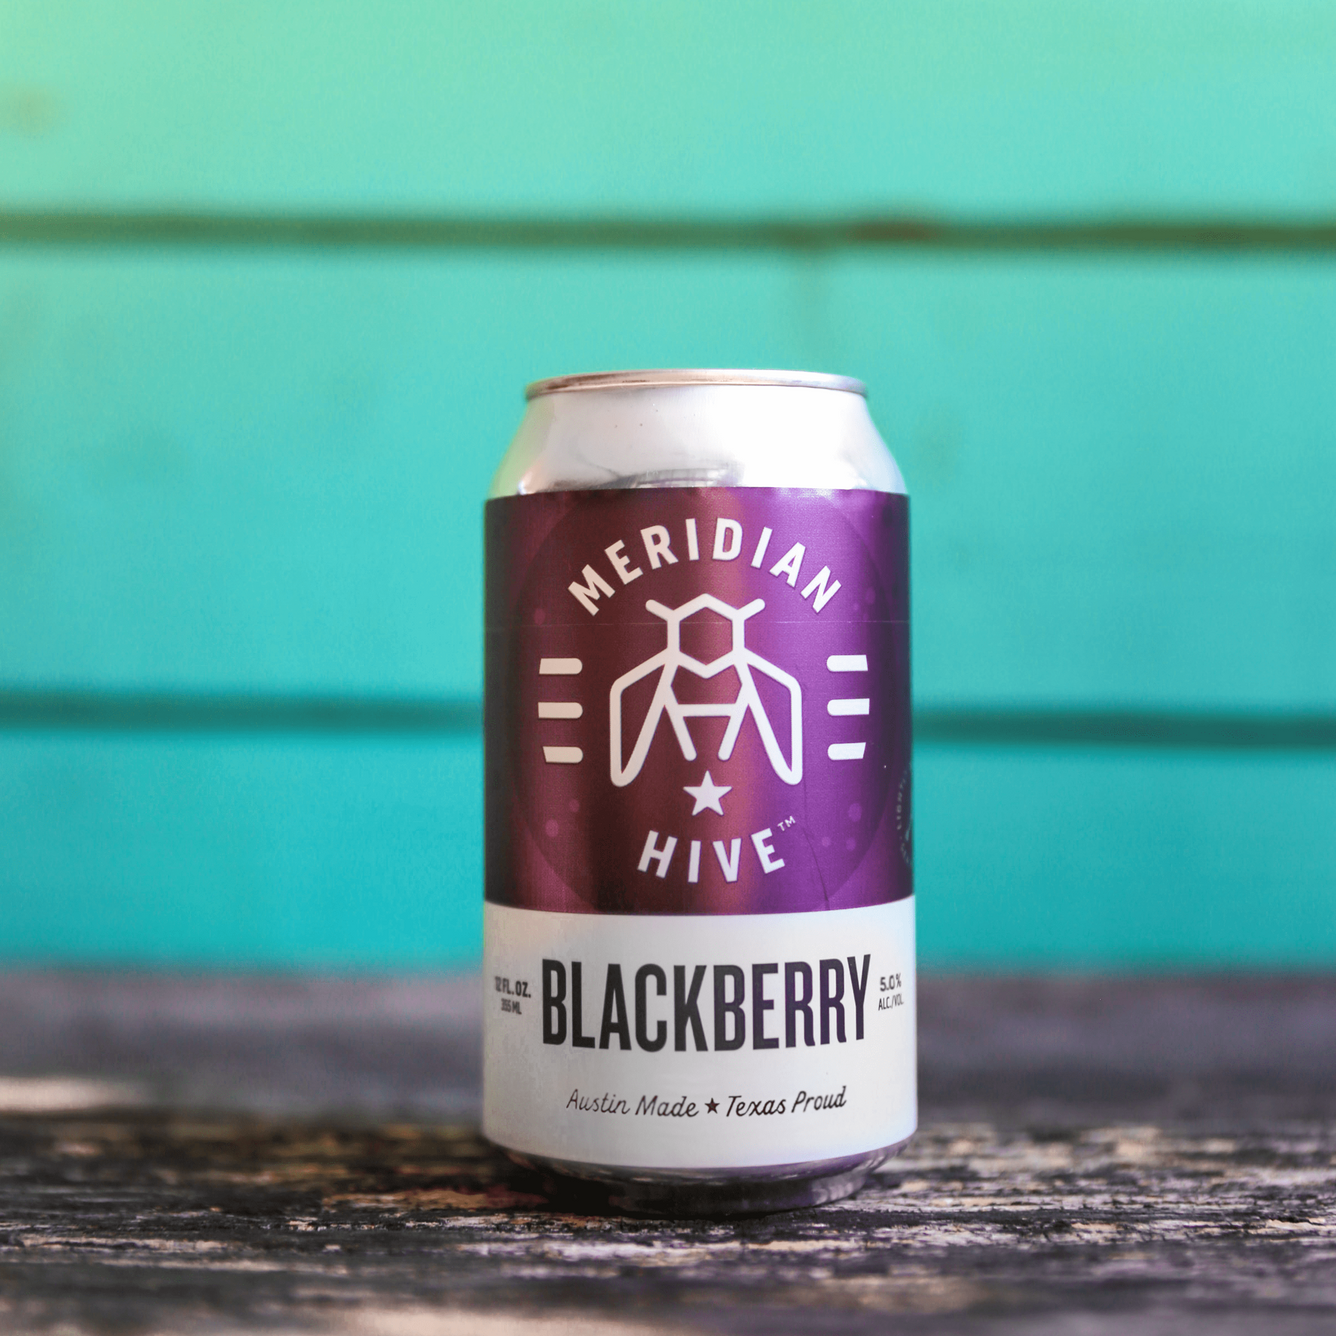 Blackberry 4 Pack Cans - Meridian Hive